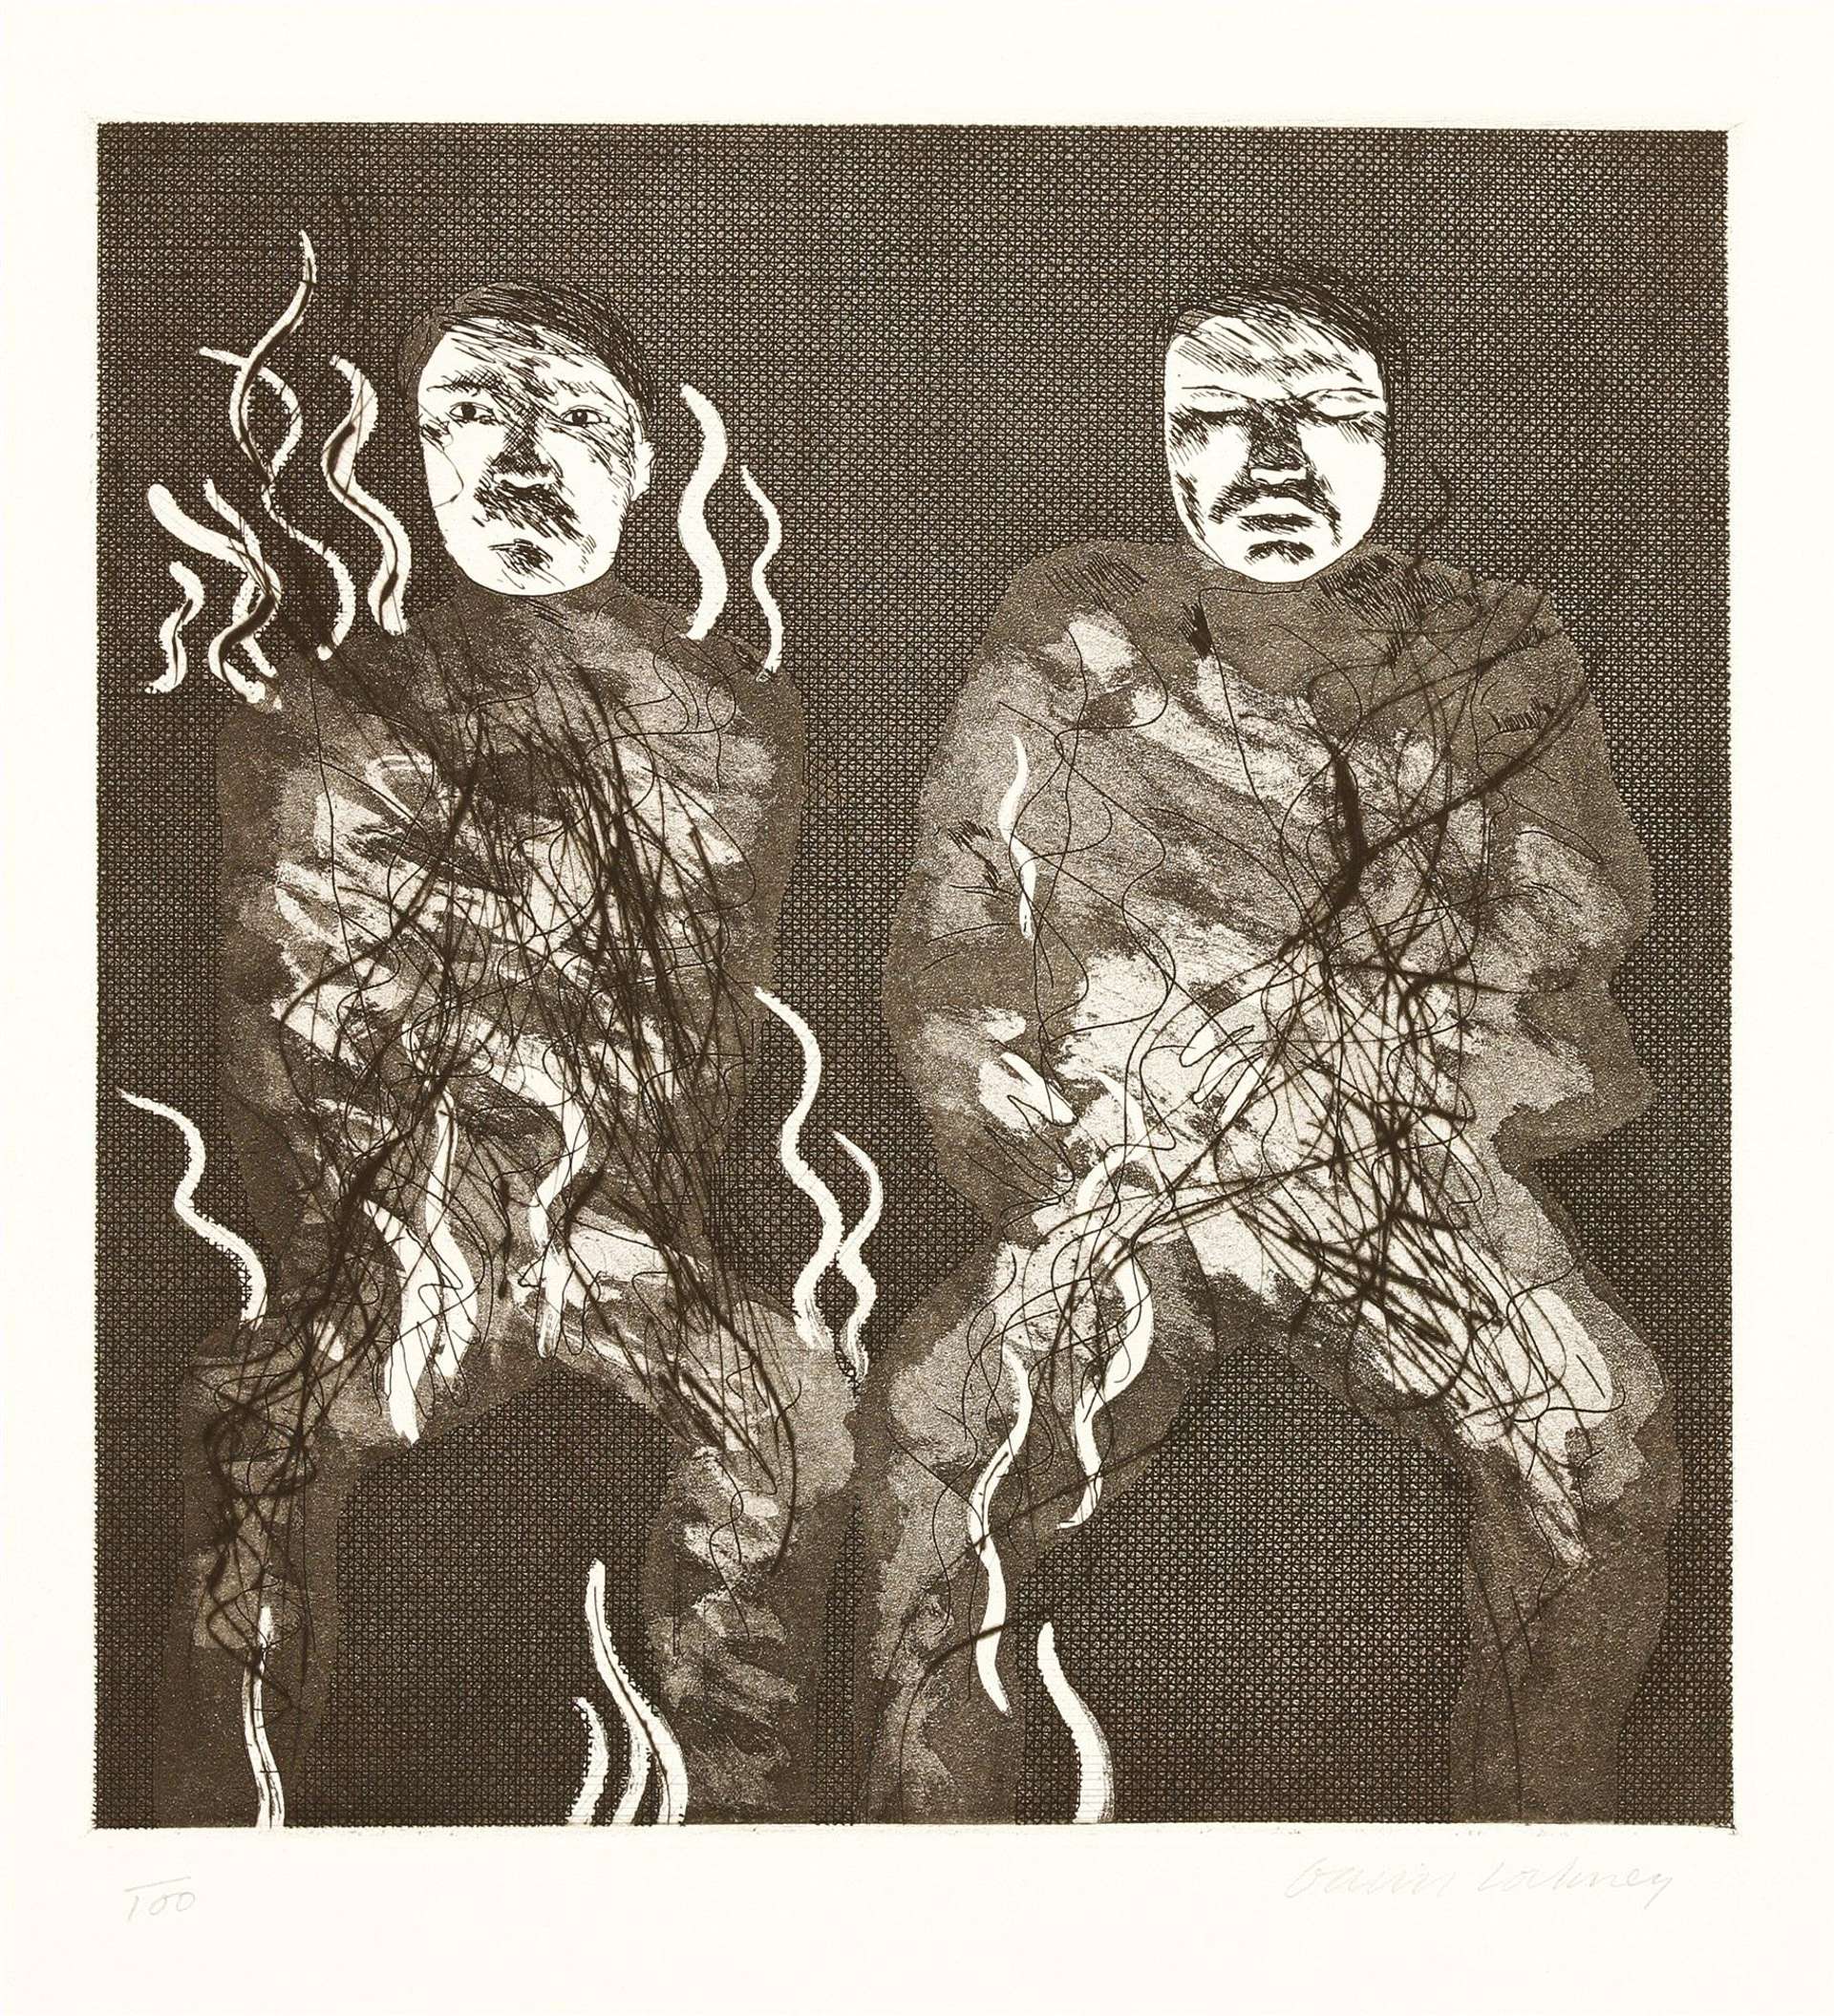 Two male figures sit in the darkness, surrounded by the stream of bright, undulating lines. Spread playfully across the print and rendered in the form of wavy lines, the fire flames illuminate the grave expression on the two men’s faces. 